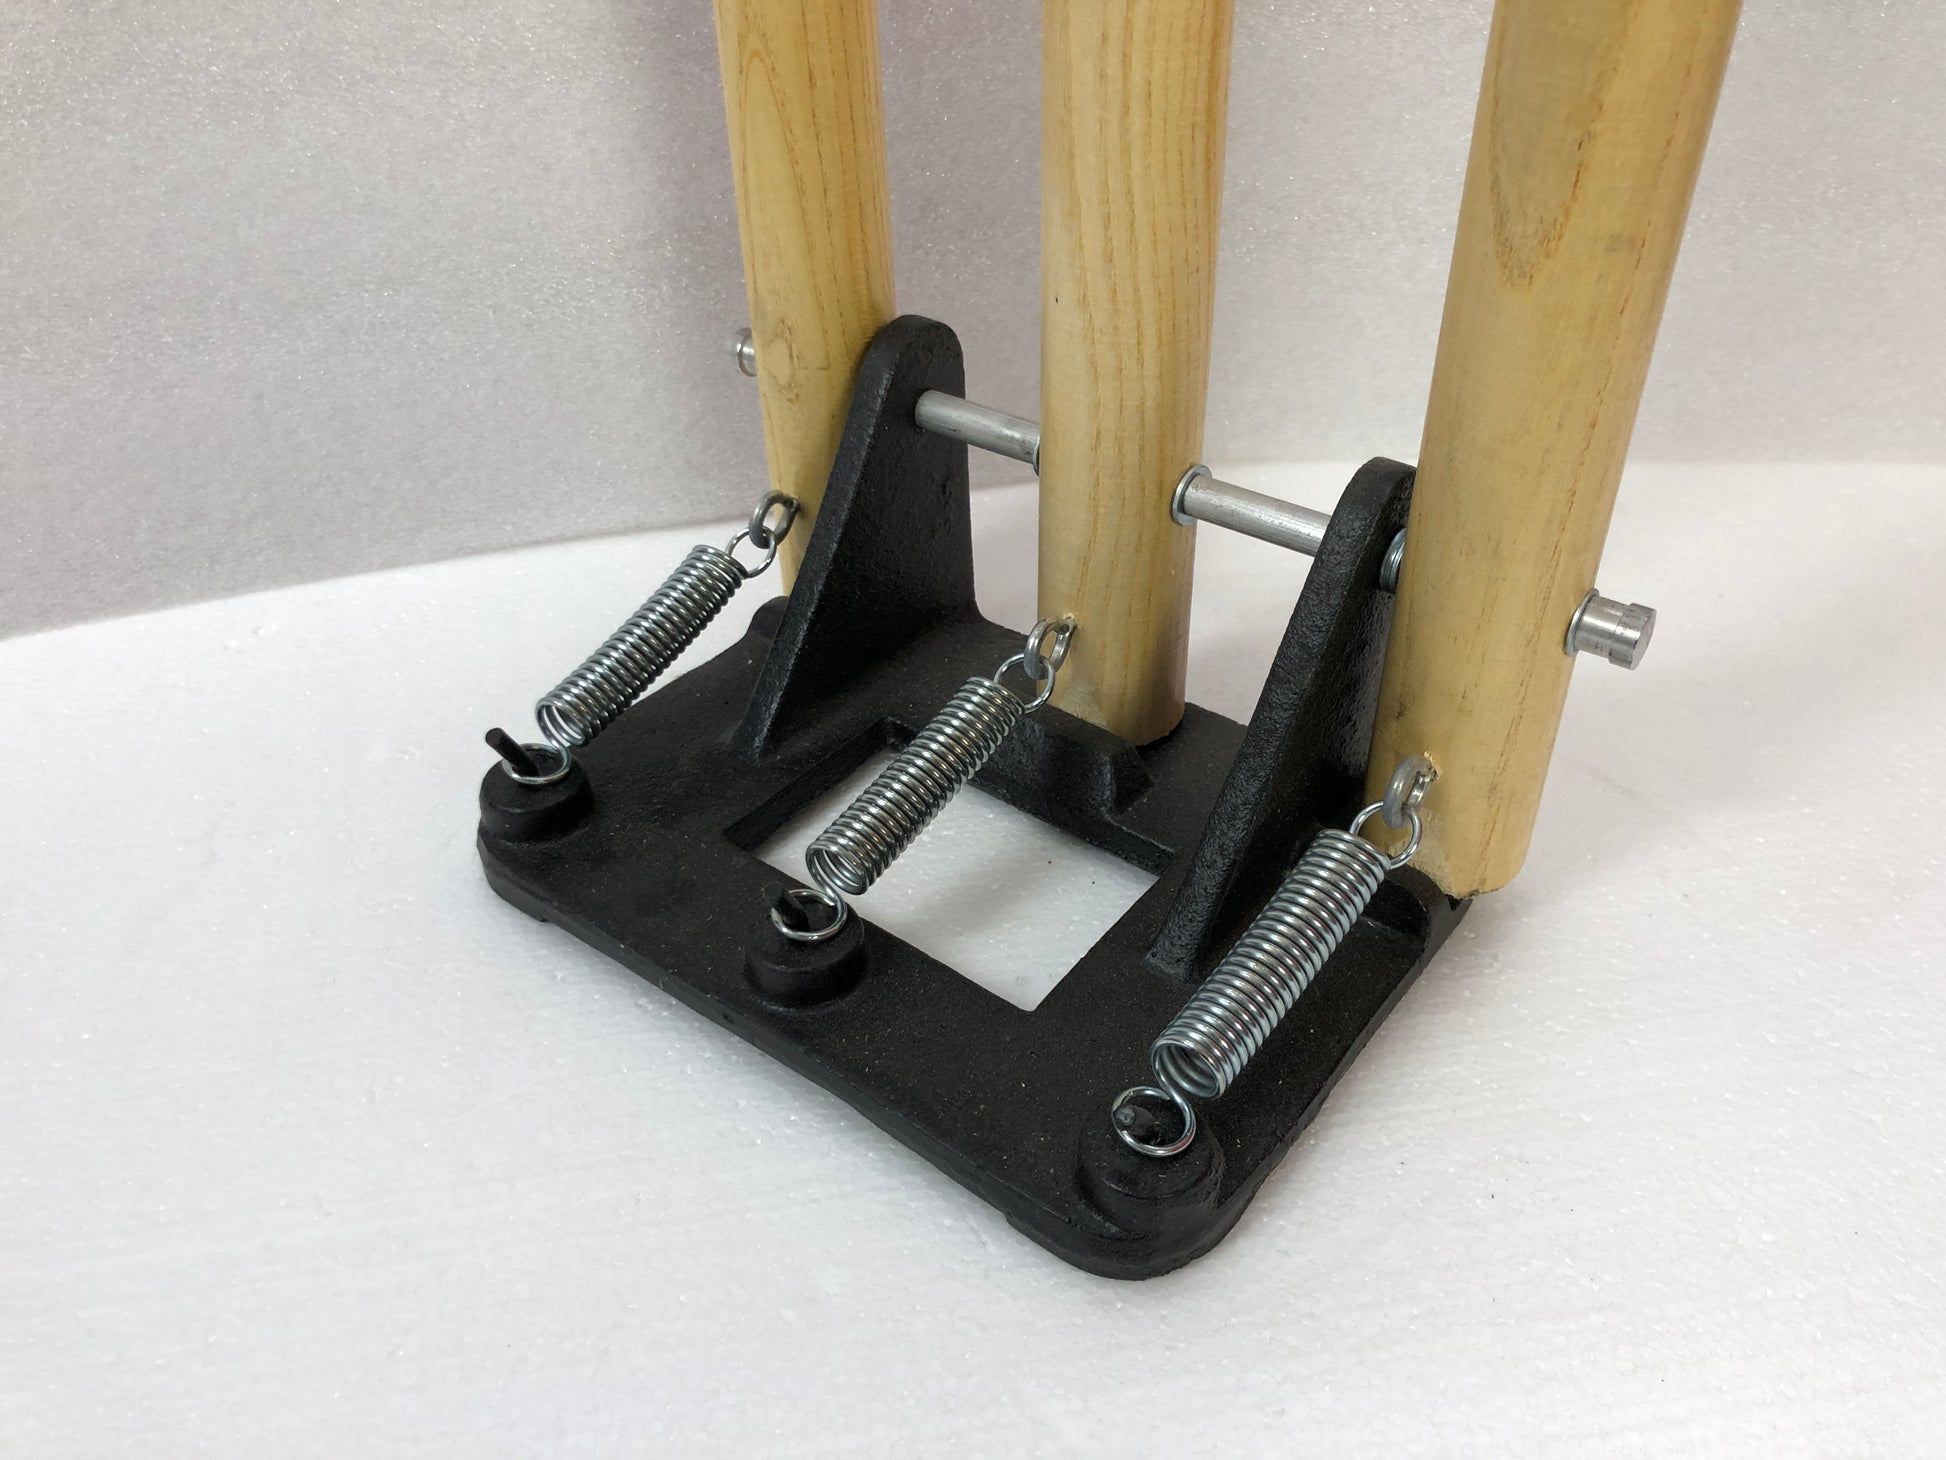 Set of Black Ash spring return stumps, featuring three stumps mounted on a spring-loaded base for convenience and portability, comes with bails in matching colors, made of Ash wood, available in black, blue, and natural wood colors.